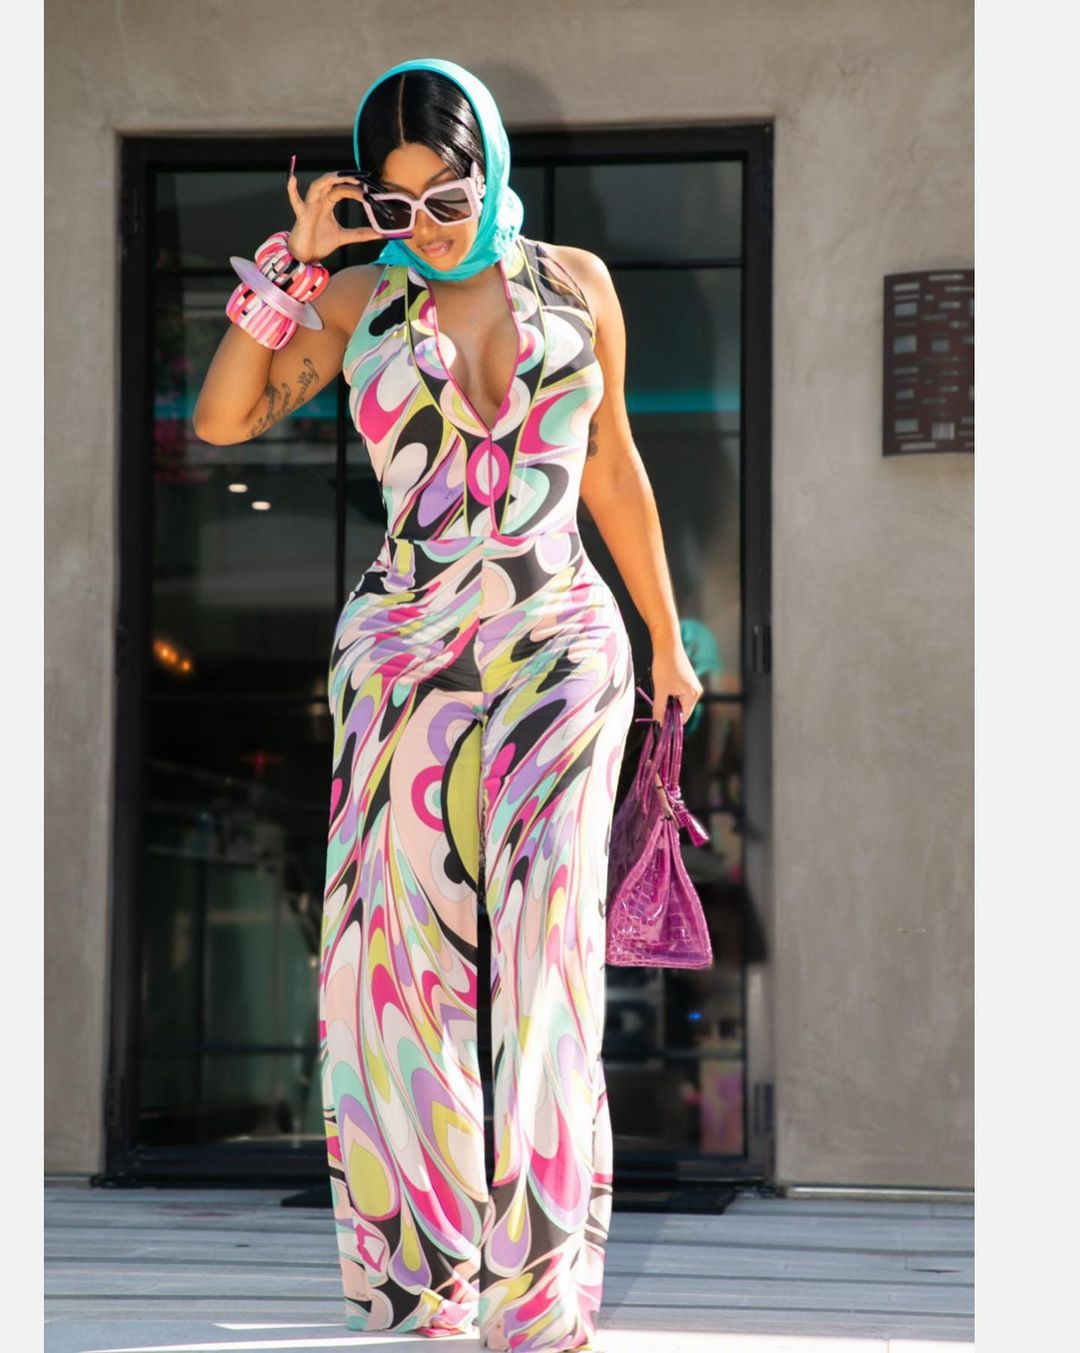 CardiB- Keeping It Colourful In Jumpsuit